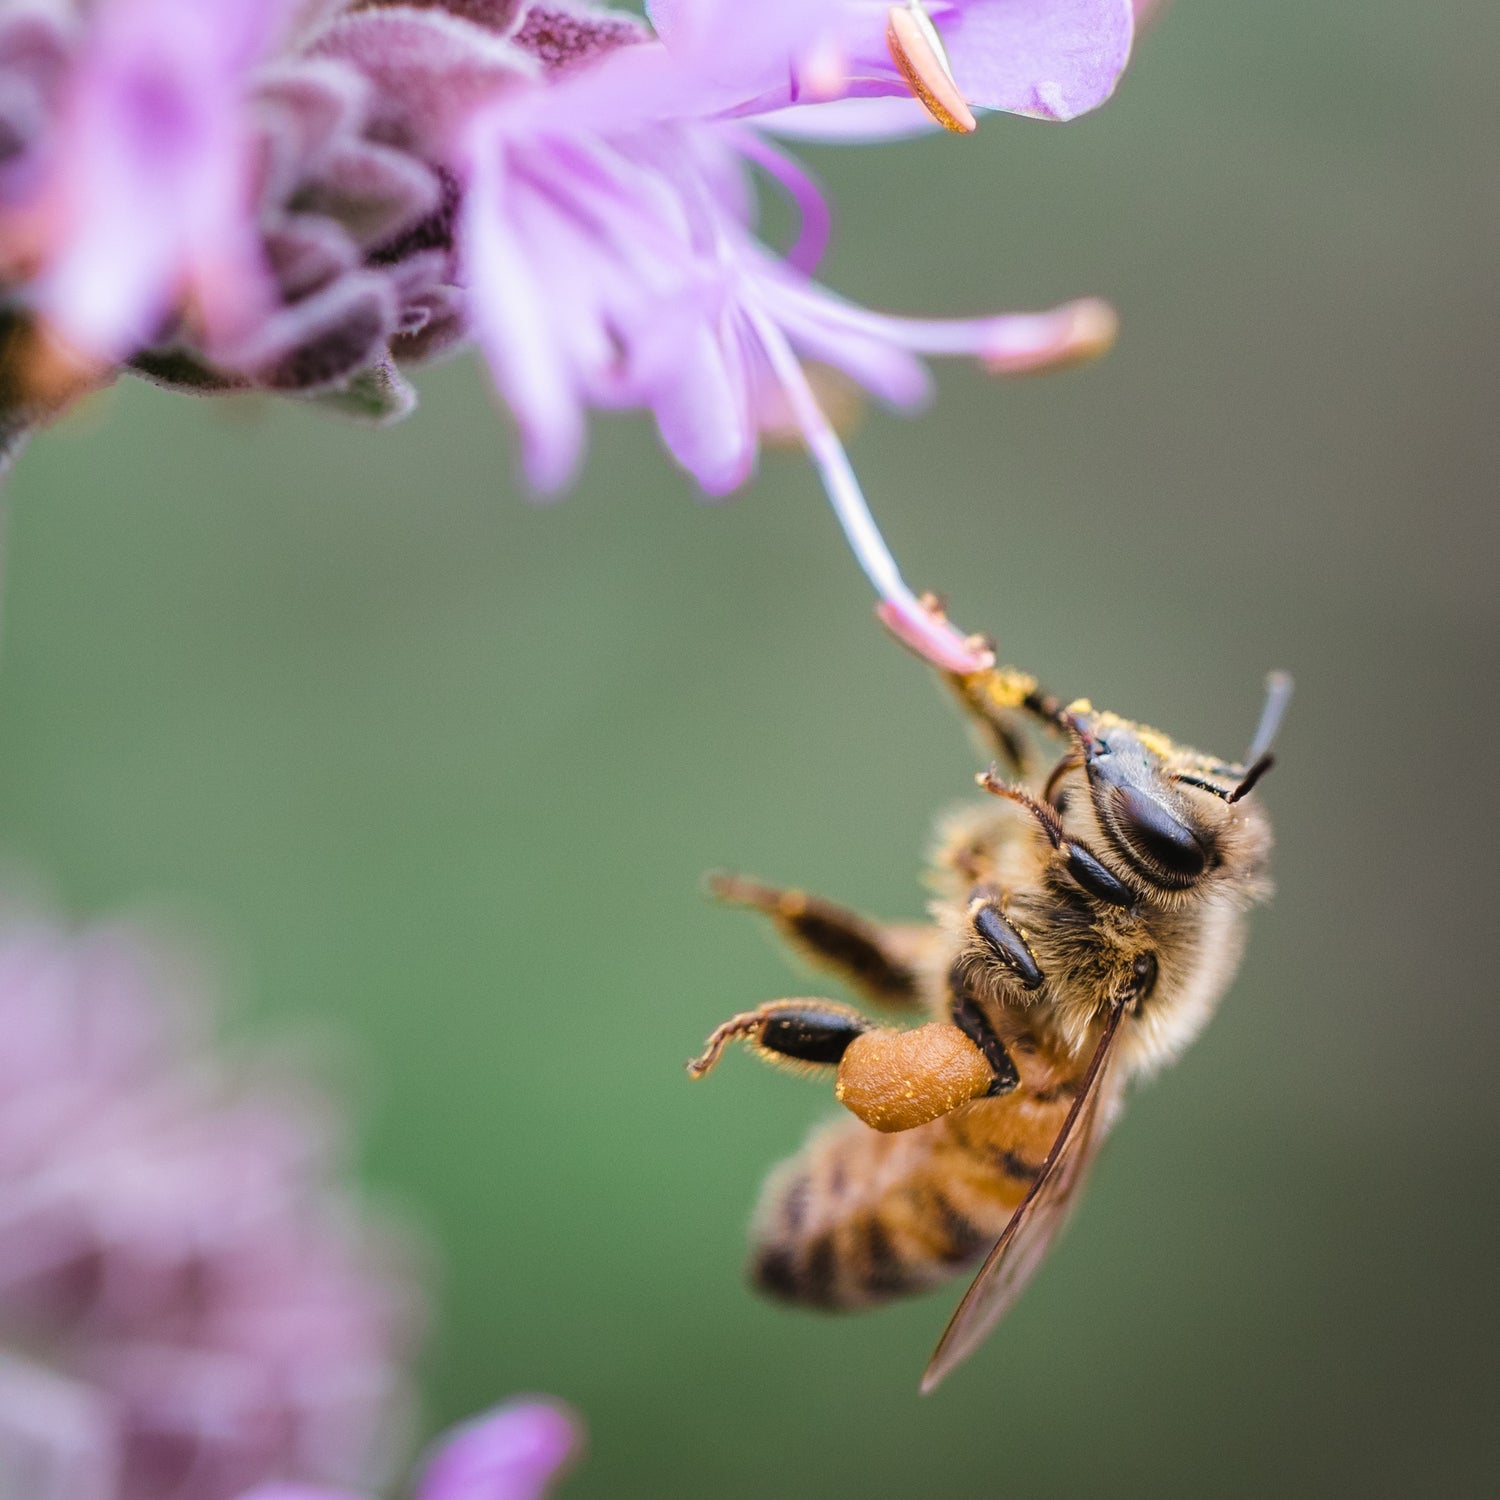 honeybee drinking nectar from a purple flower - Connected Clothing Company donated 10% to The Honeybee Conservancy save the bees efforts